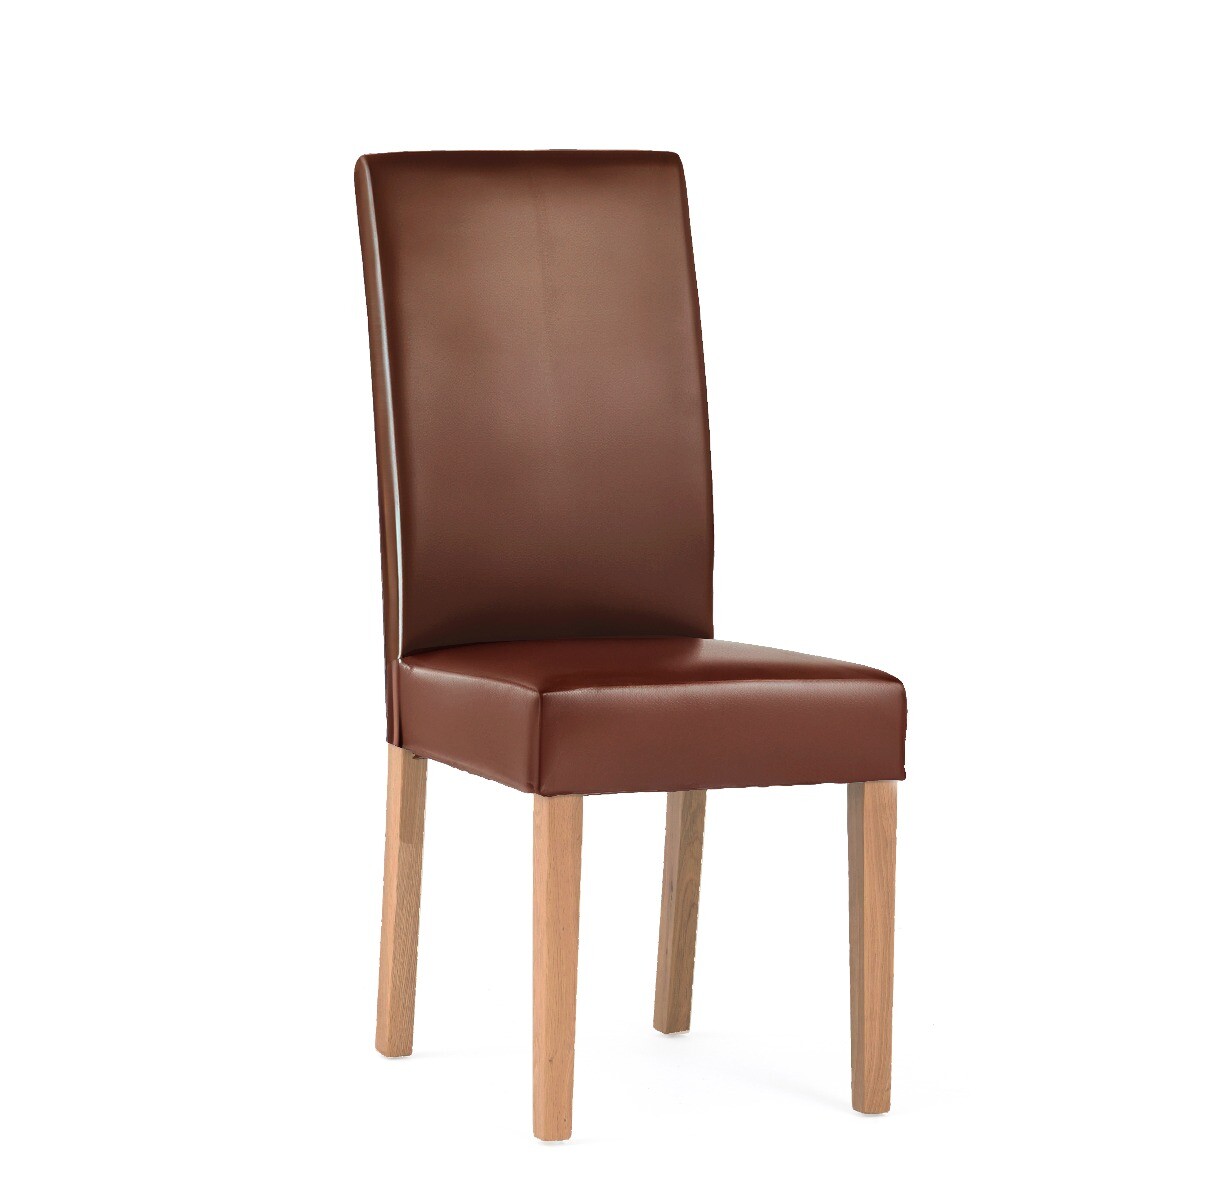 Photo 2 of Olivia brown faux leather dining chairs